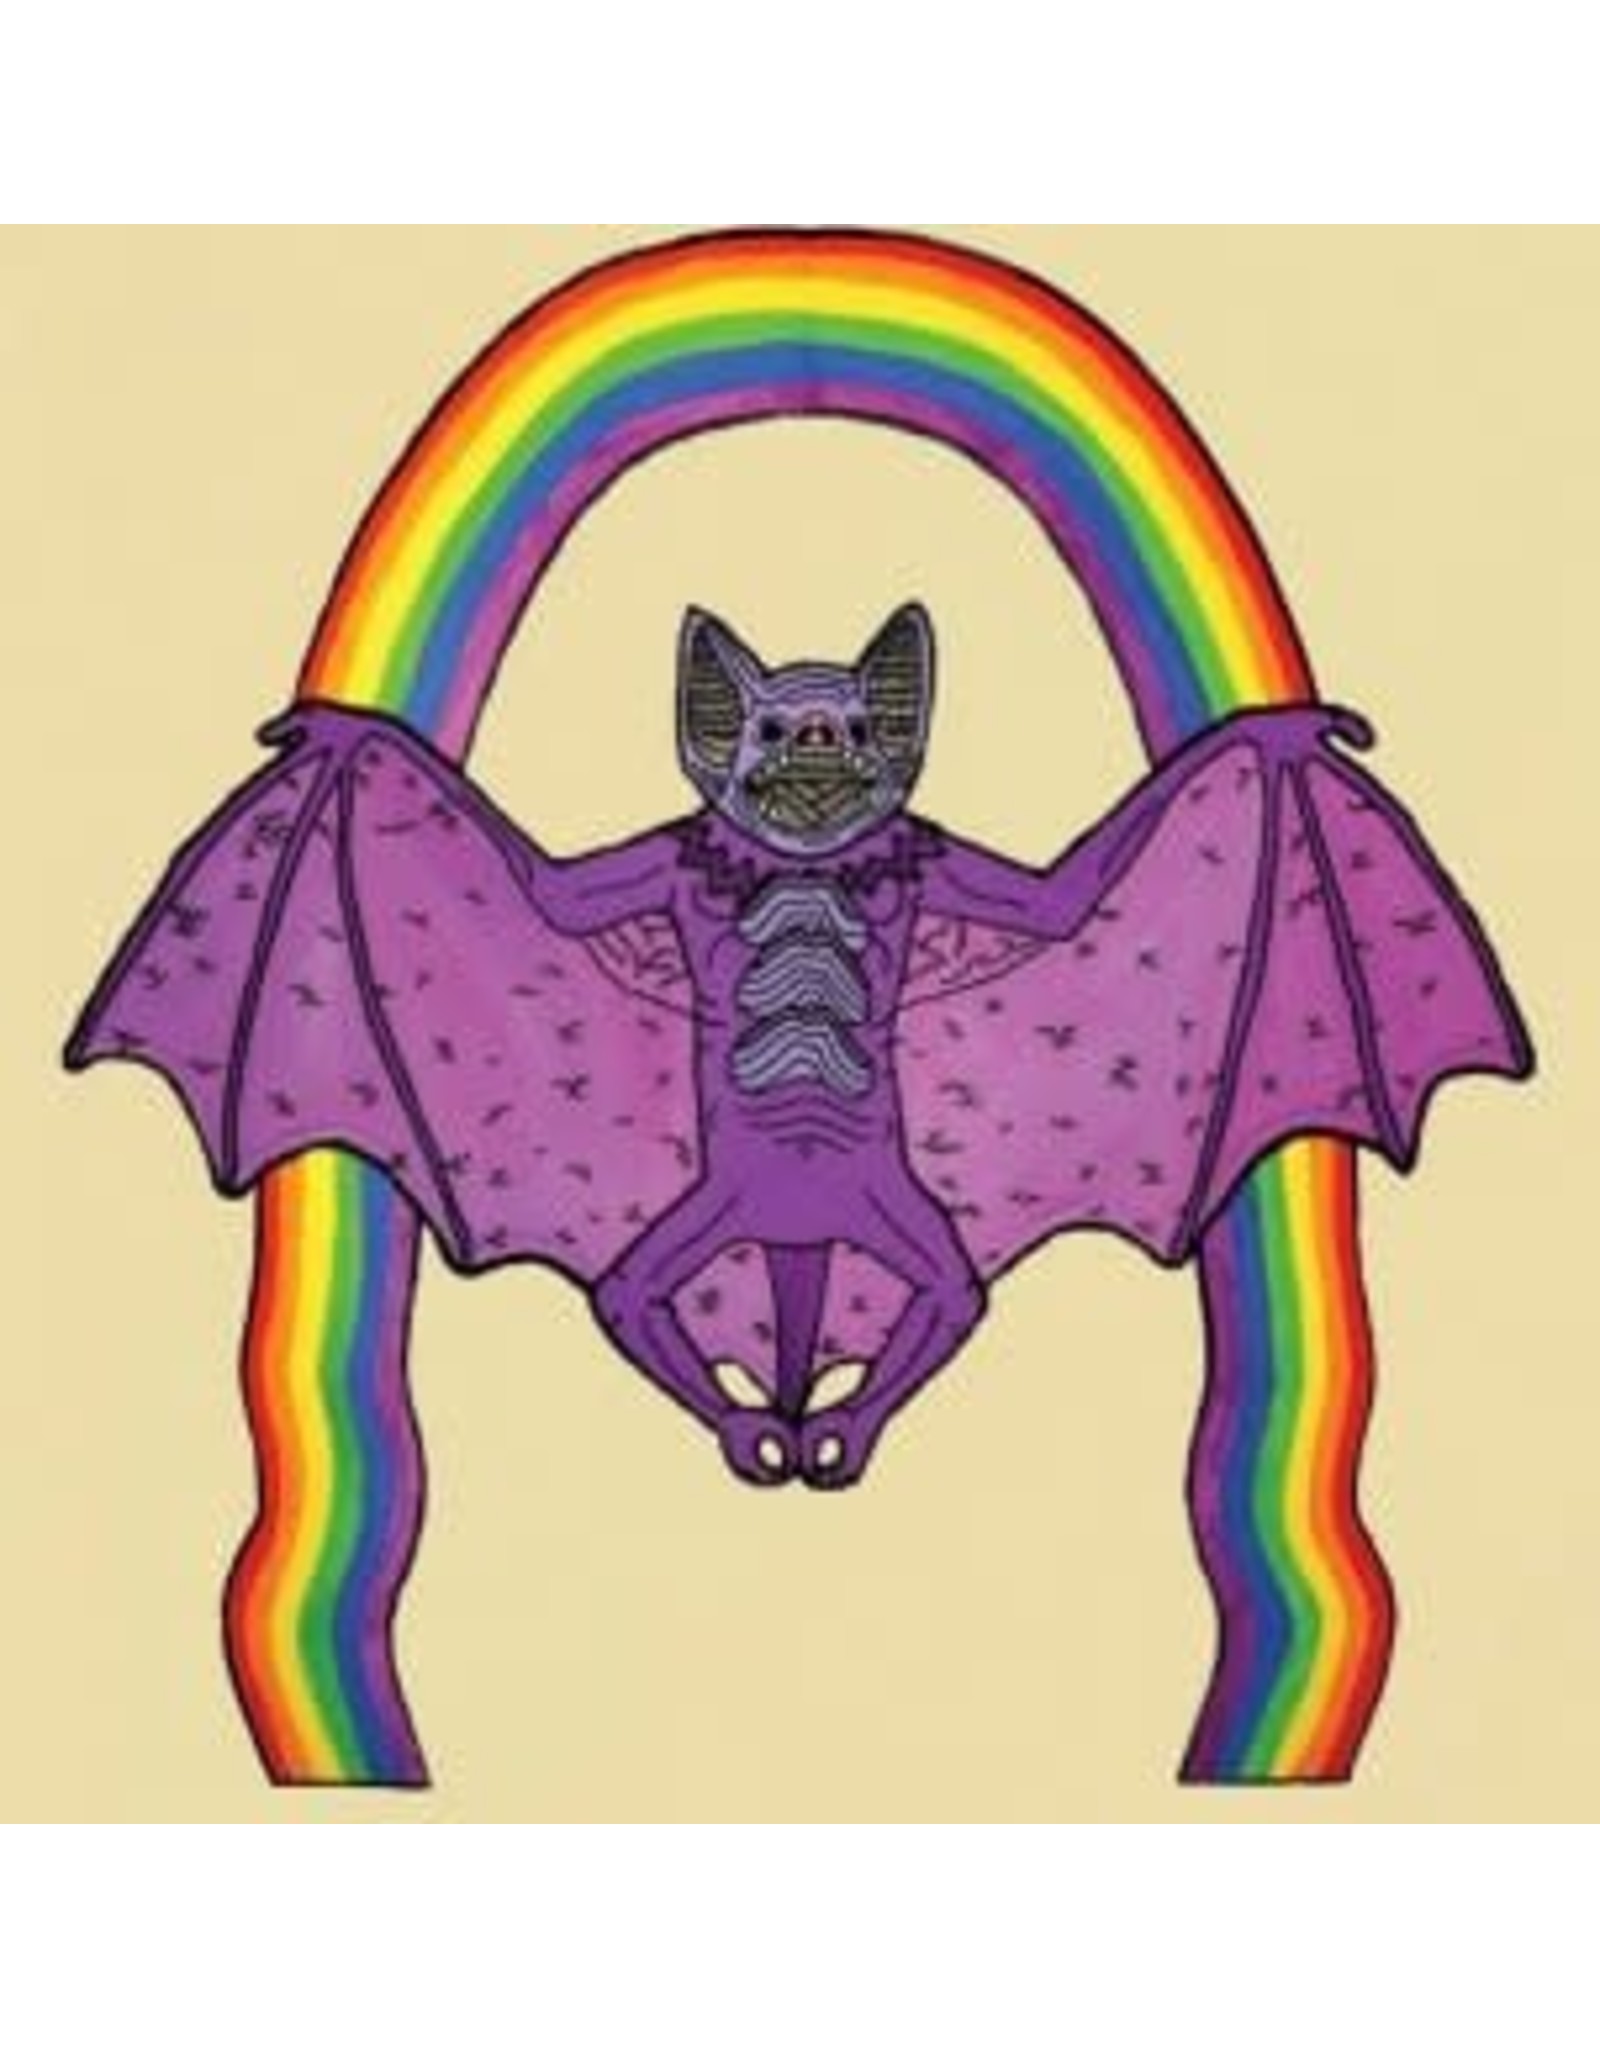 In The Red Oh Sees, Thee: Help LP